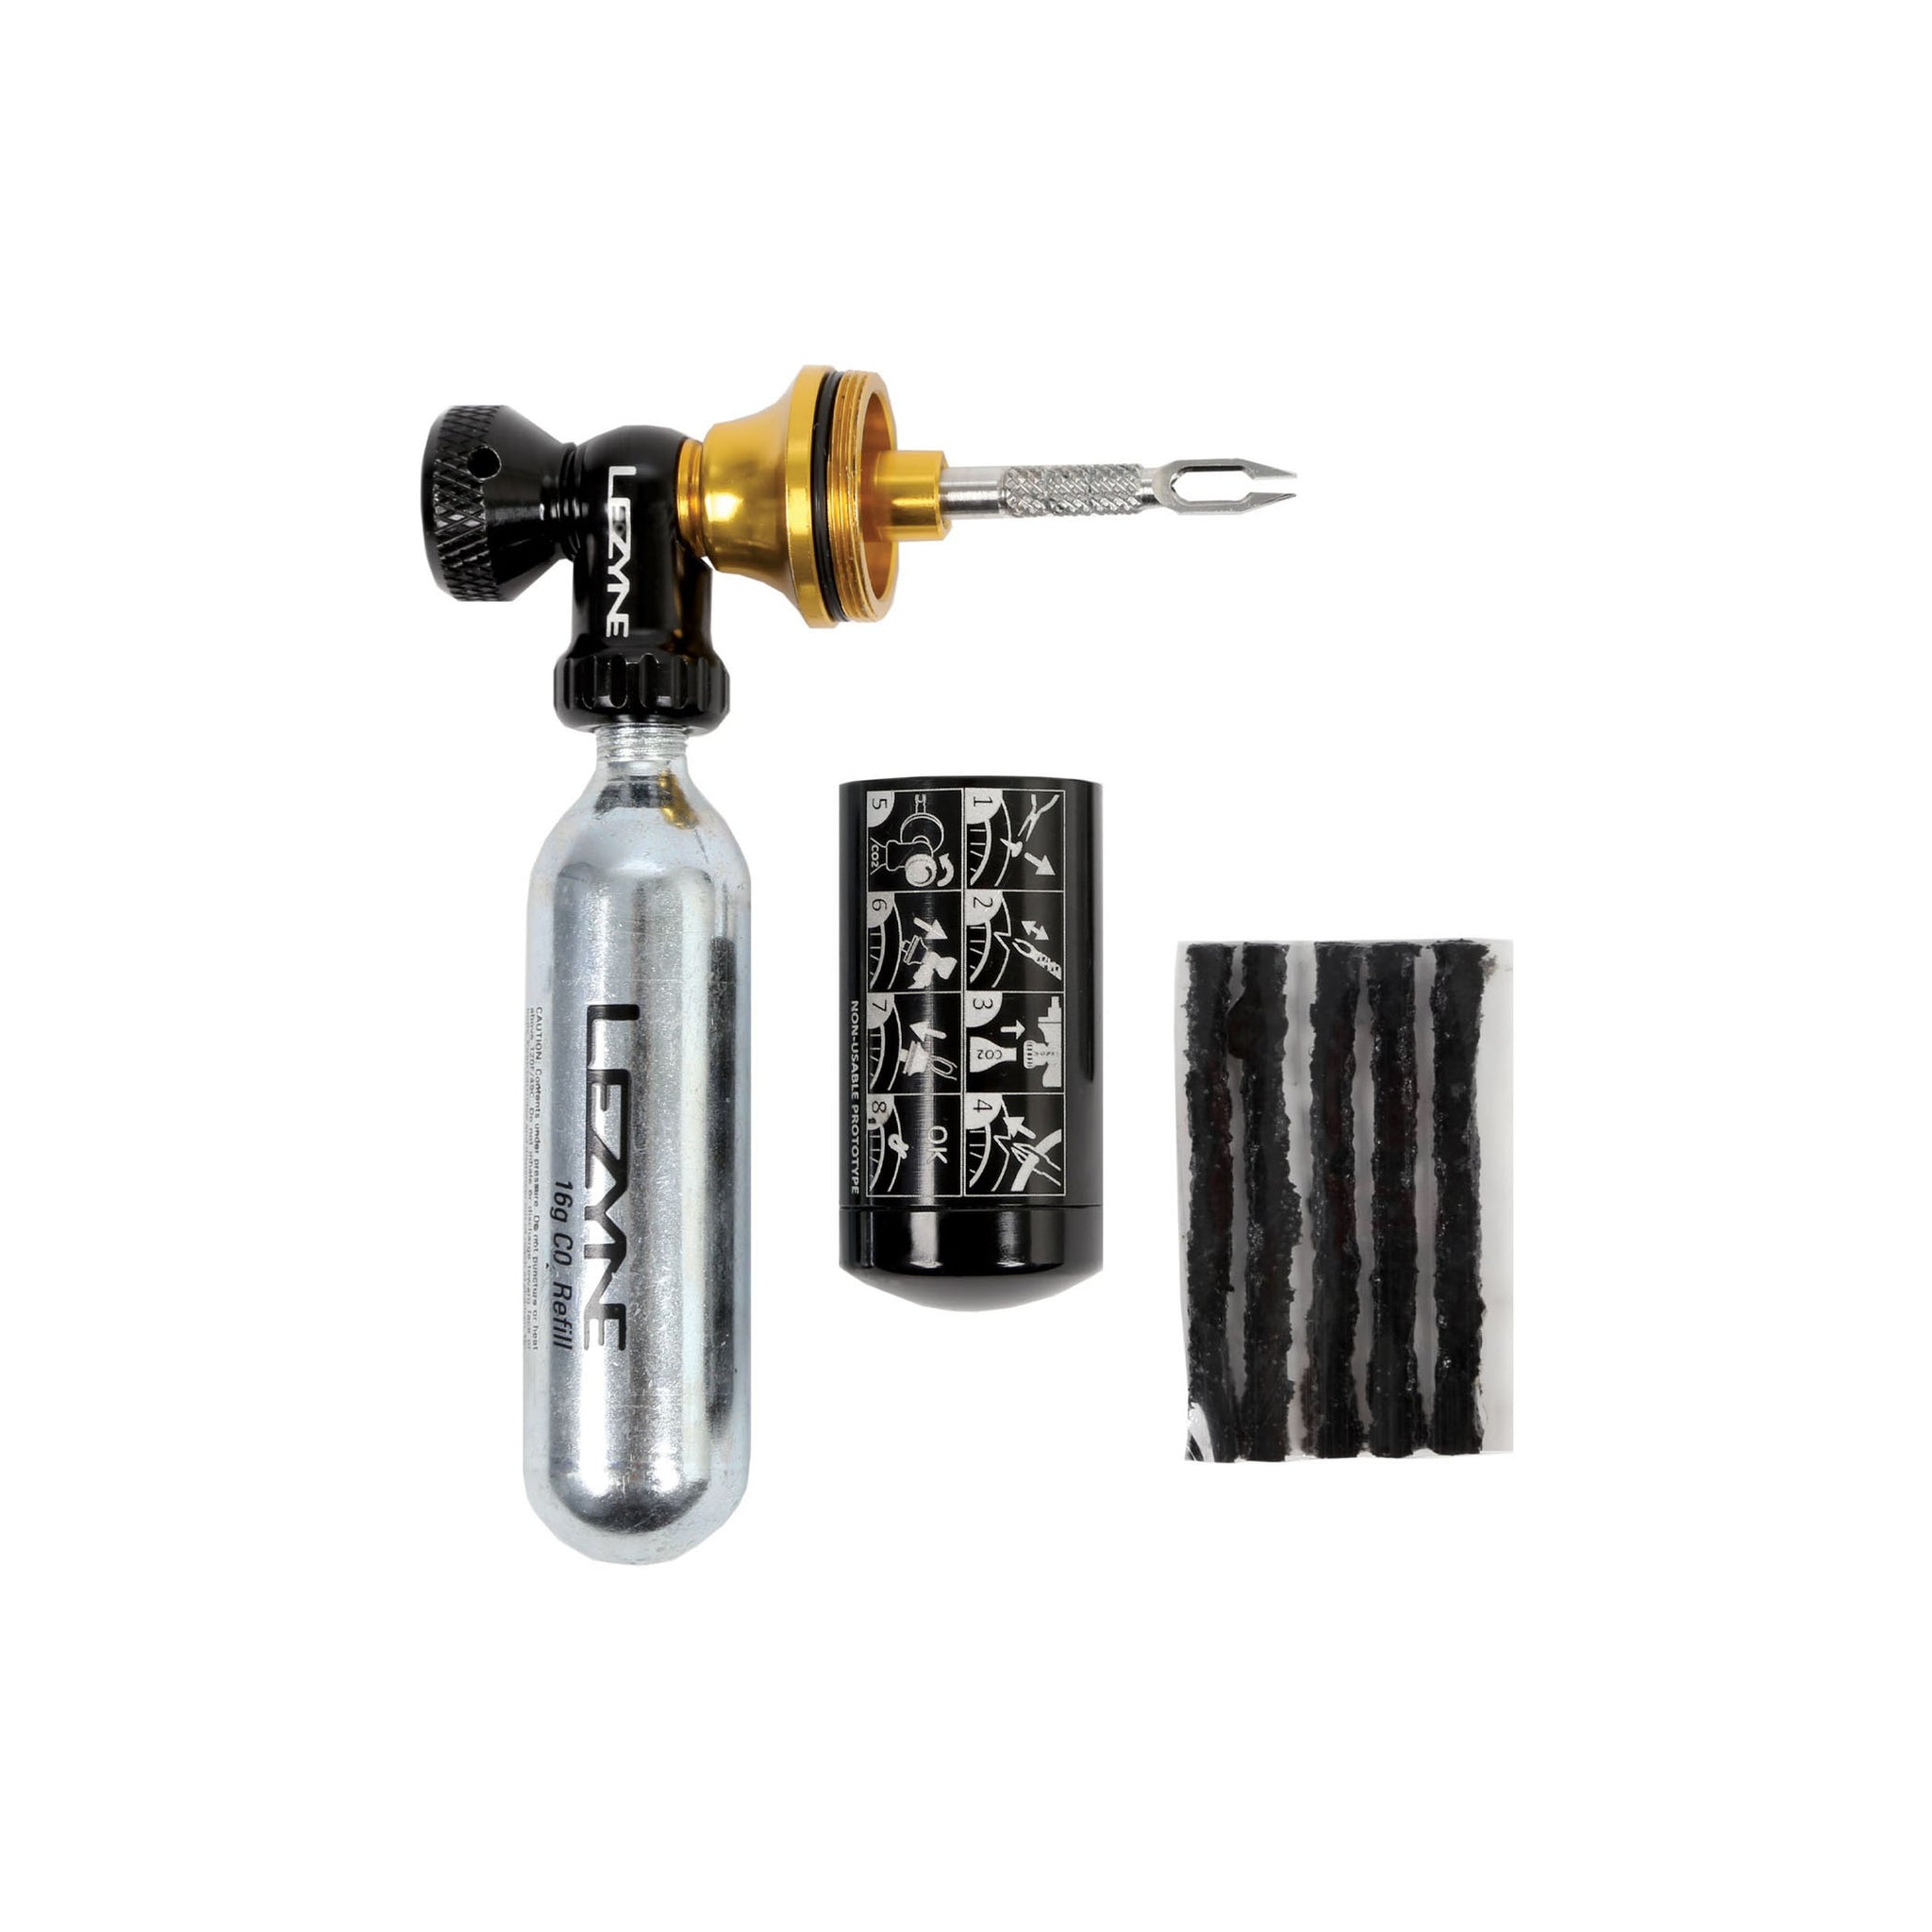 CO2 Inflator and Tubeless Tire Repair Kit - Presta & Schrader